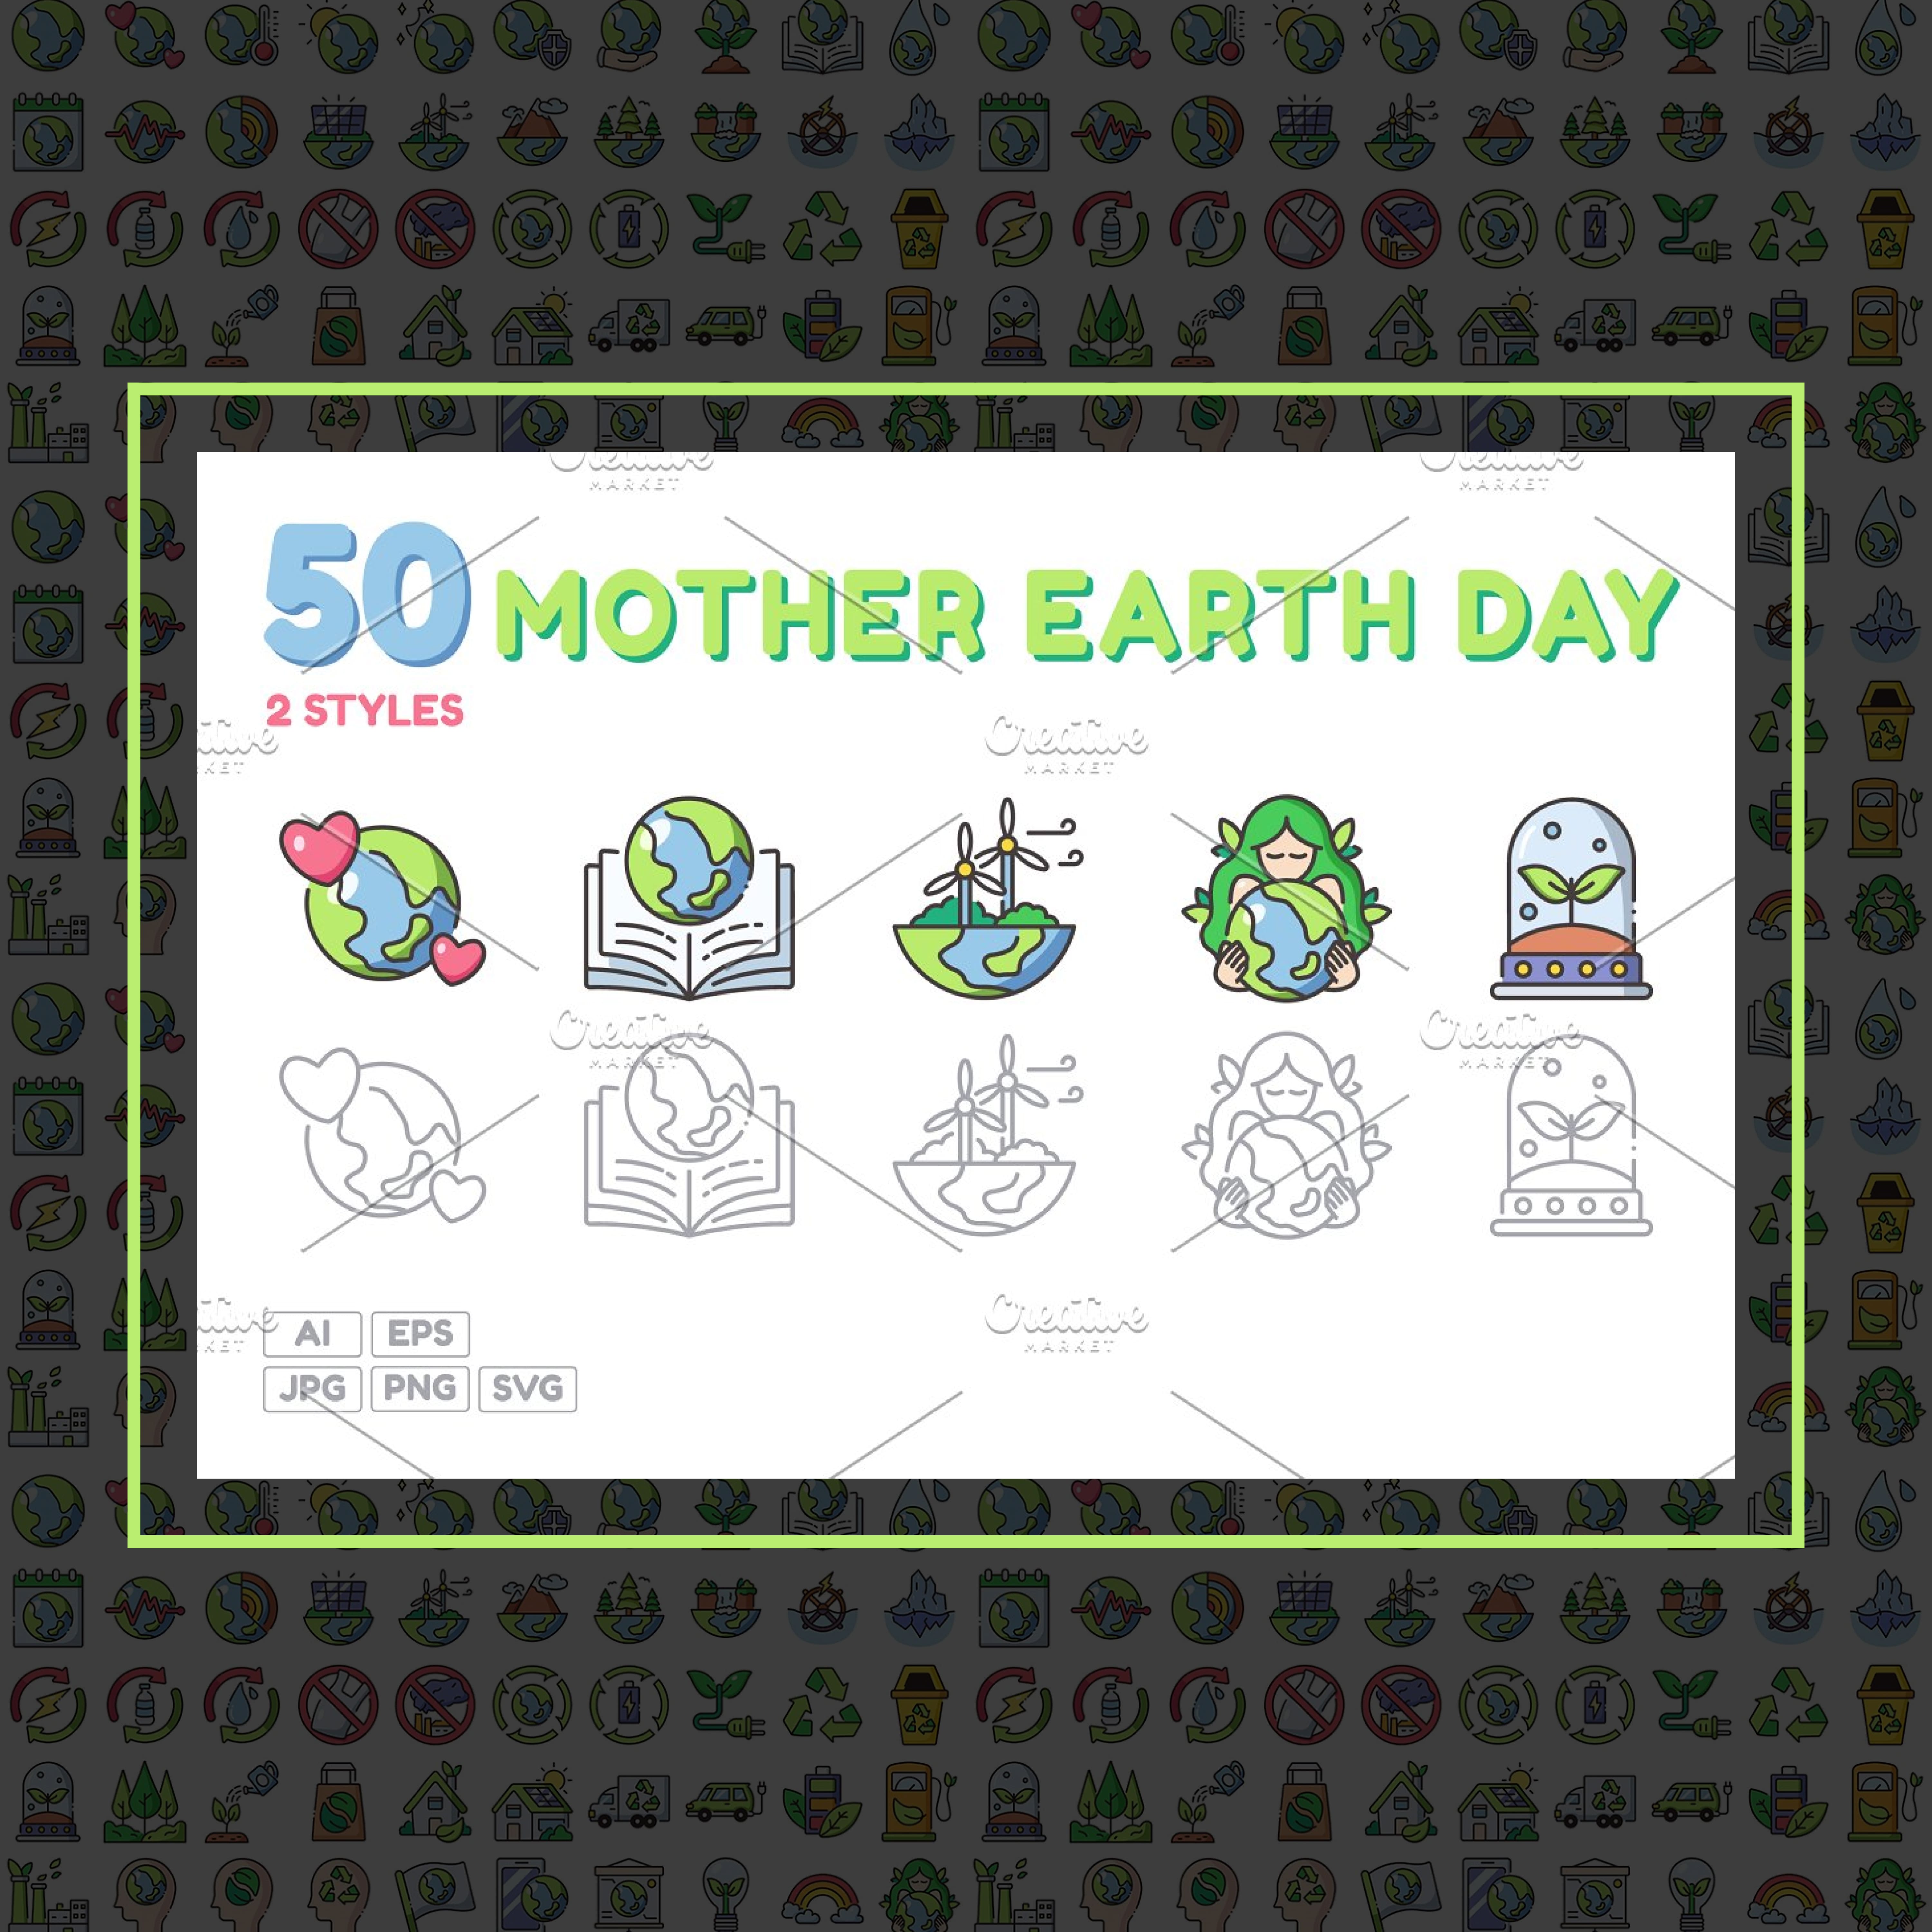 Mother Earth Day 50 Icon cover.